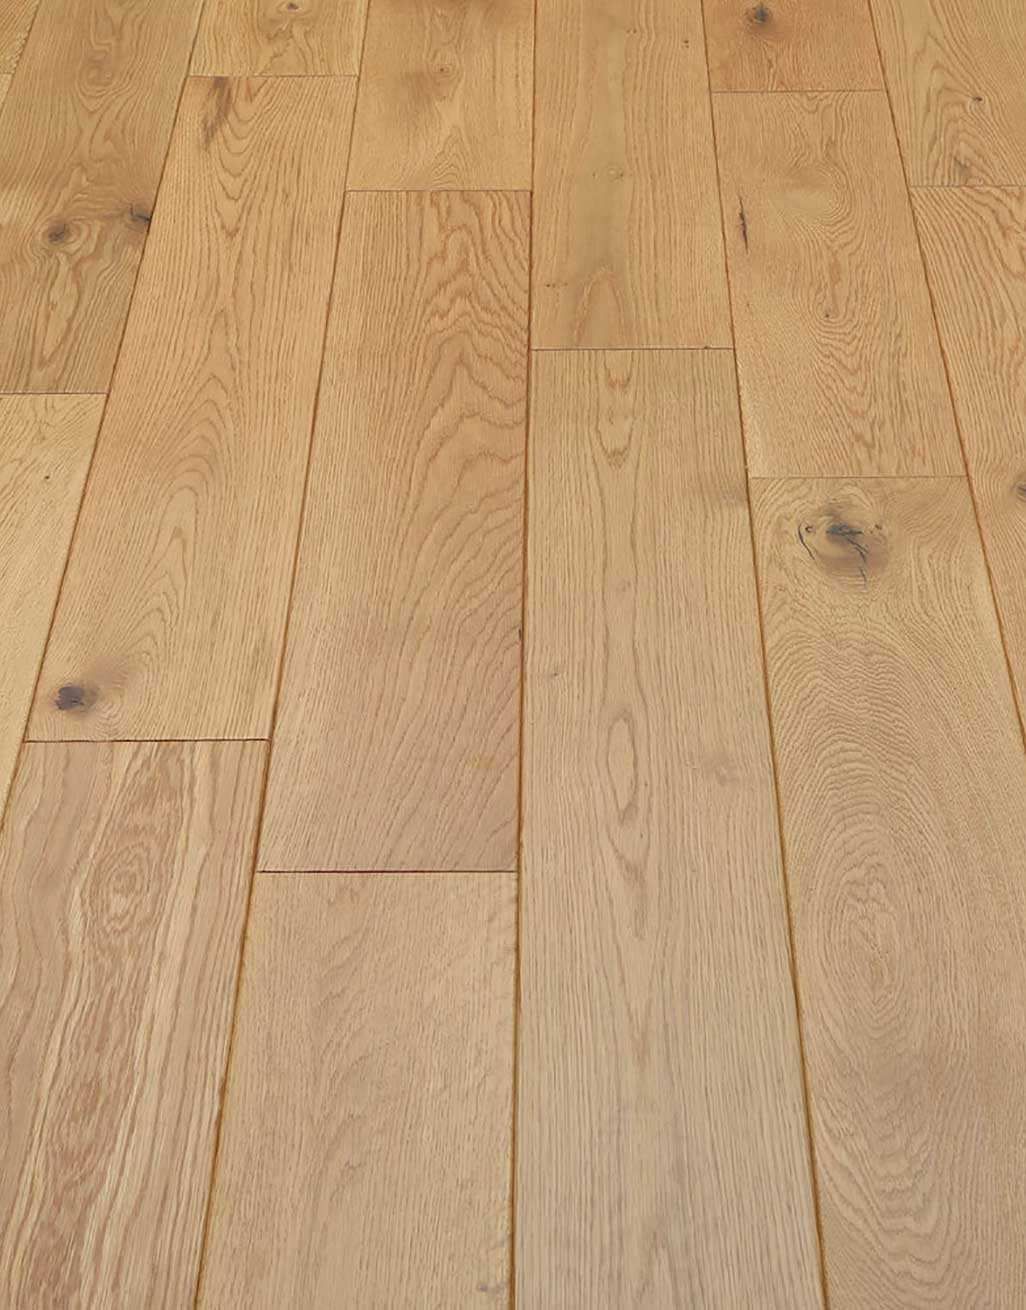 Luxury Handscraped Natural Oak Lacquered Solid Wood Flooring